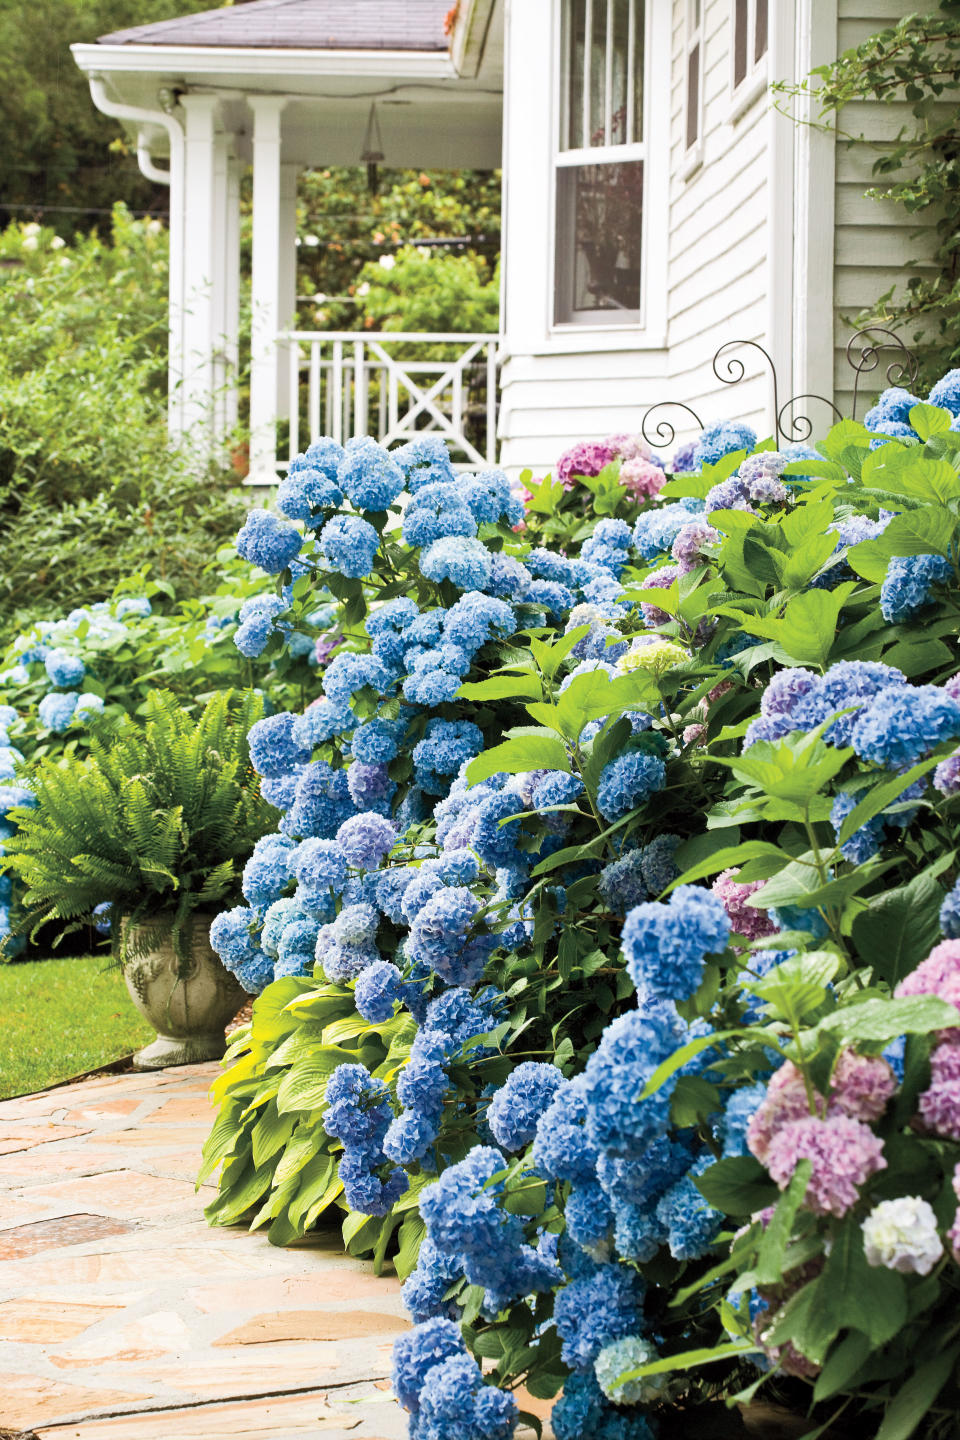 8. How can I control powdery mildew and leaf spot on French hydrangea?